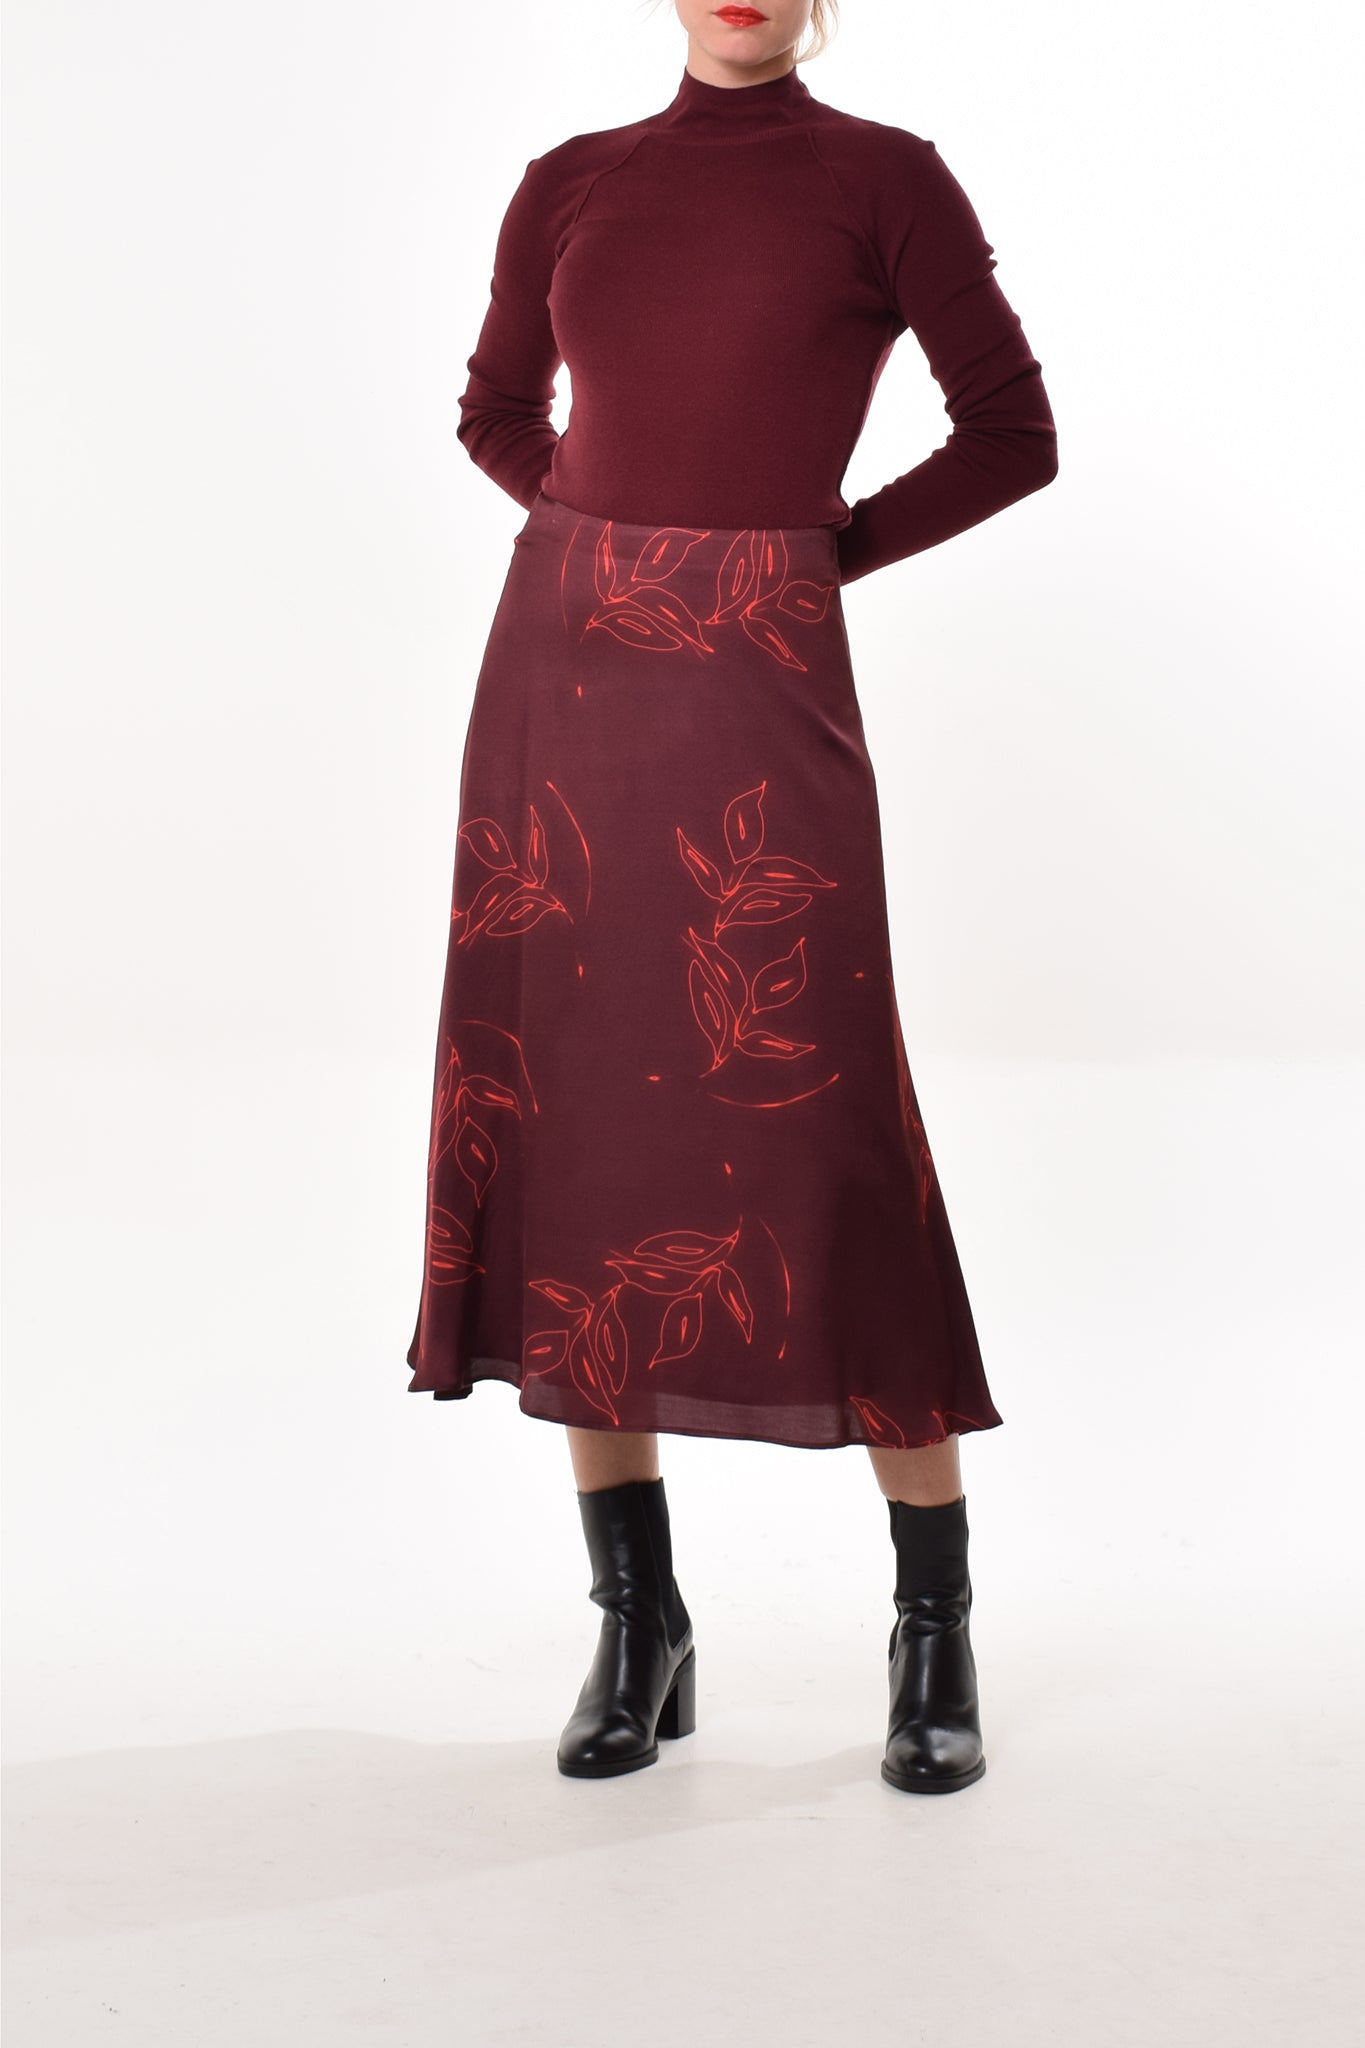 Moss skirt in Maroon (print small)